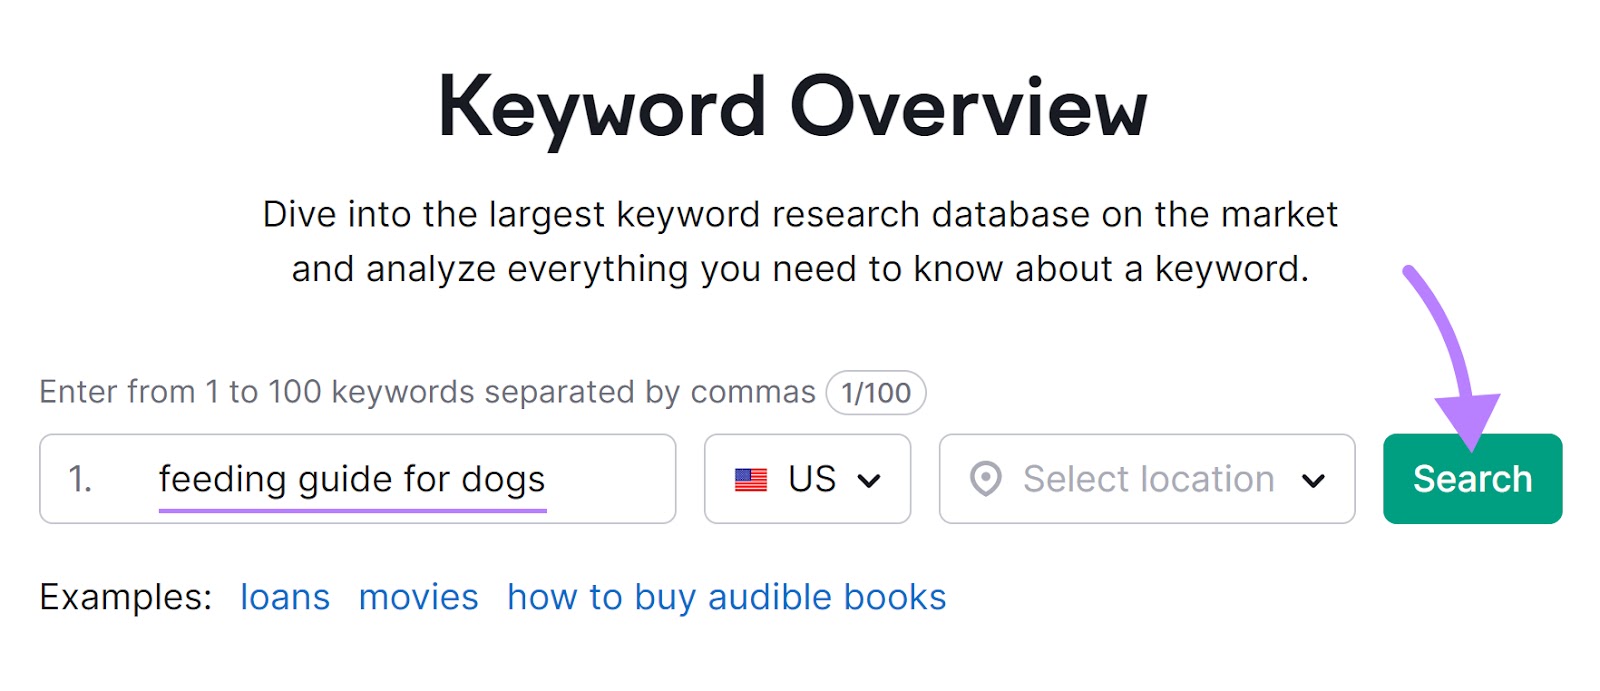 "feeding usher  for dogs" entered into the Keyword Overview hunt  bar